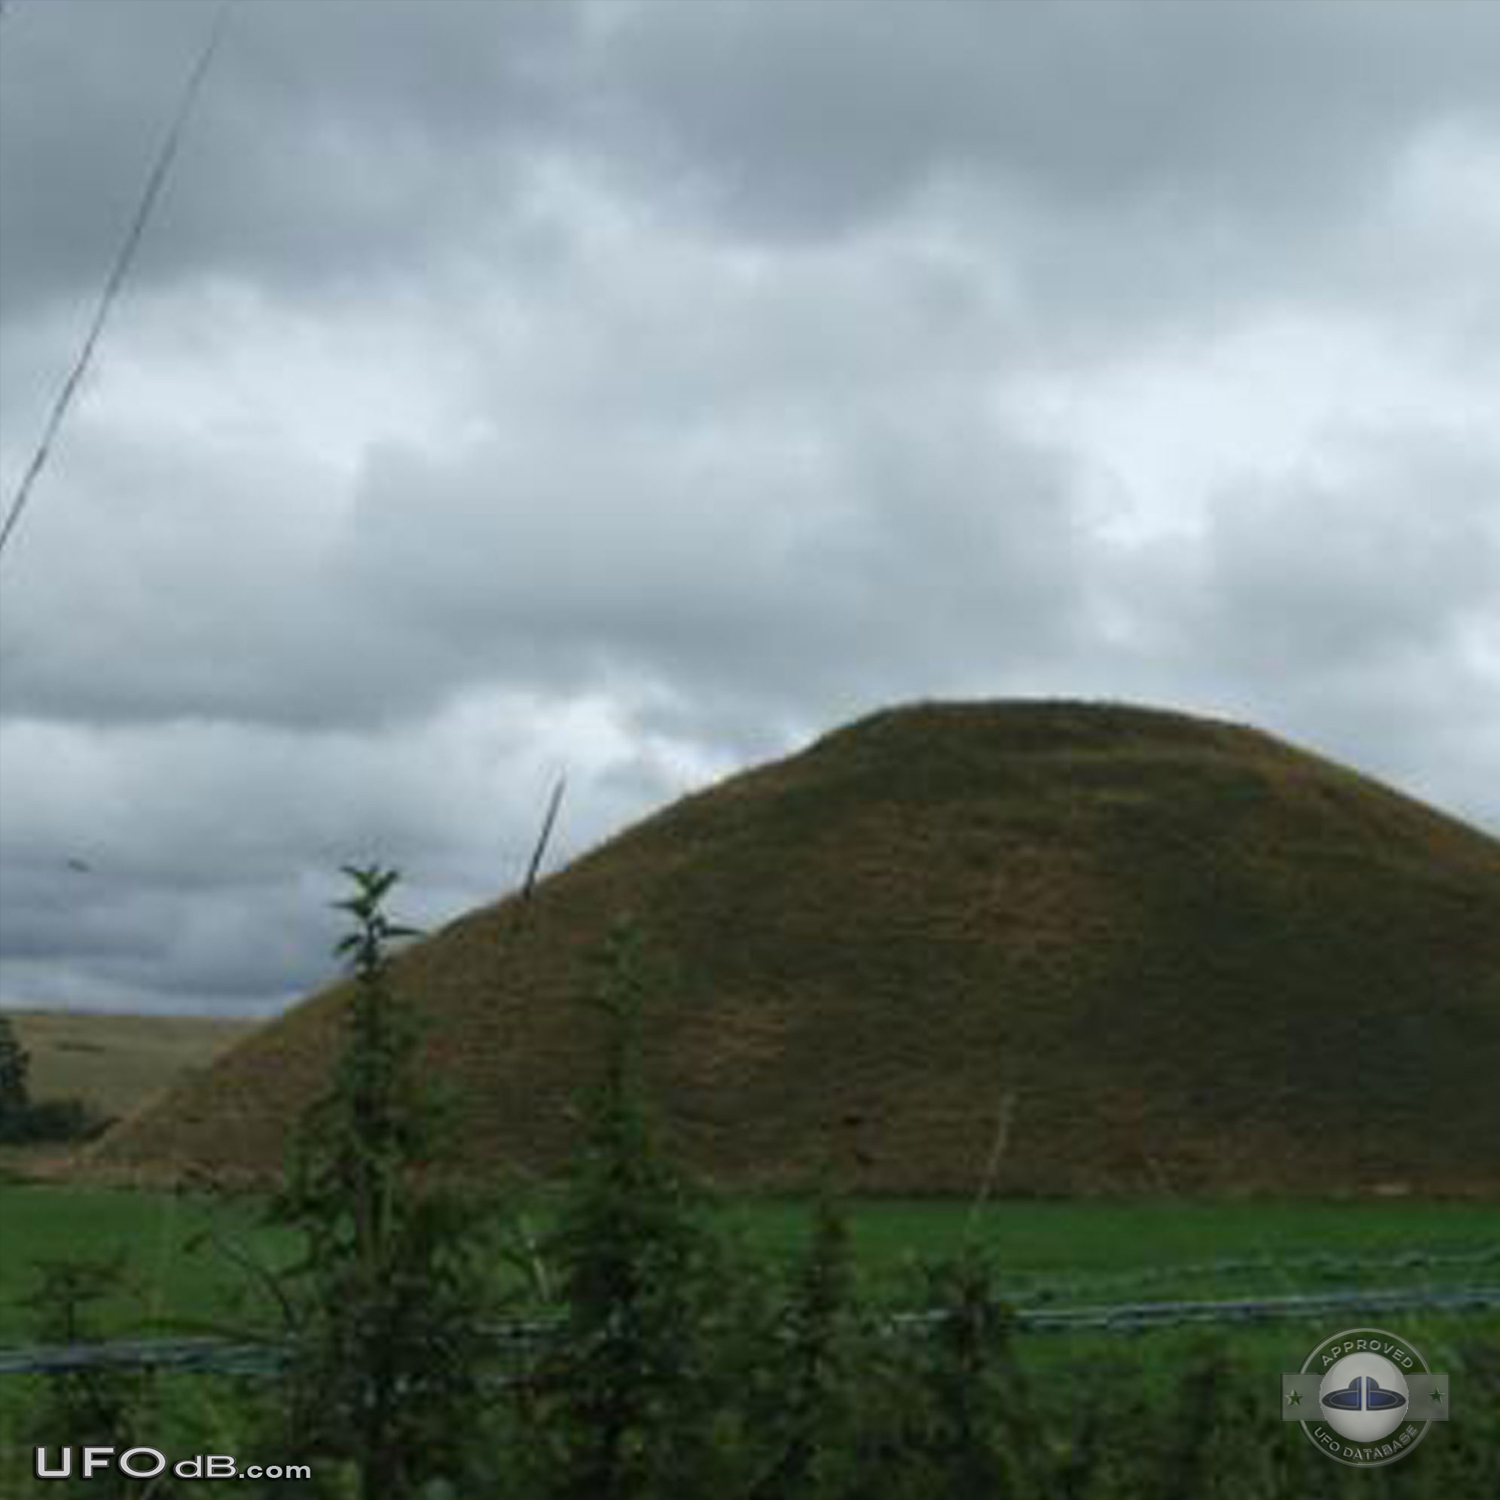 Saucer UFO caught on picture near Silbury Hill in Wiltshire county UK UFO Picture #480-1